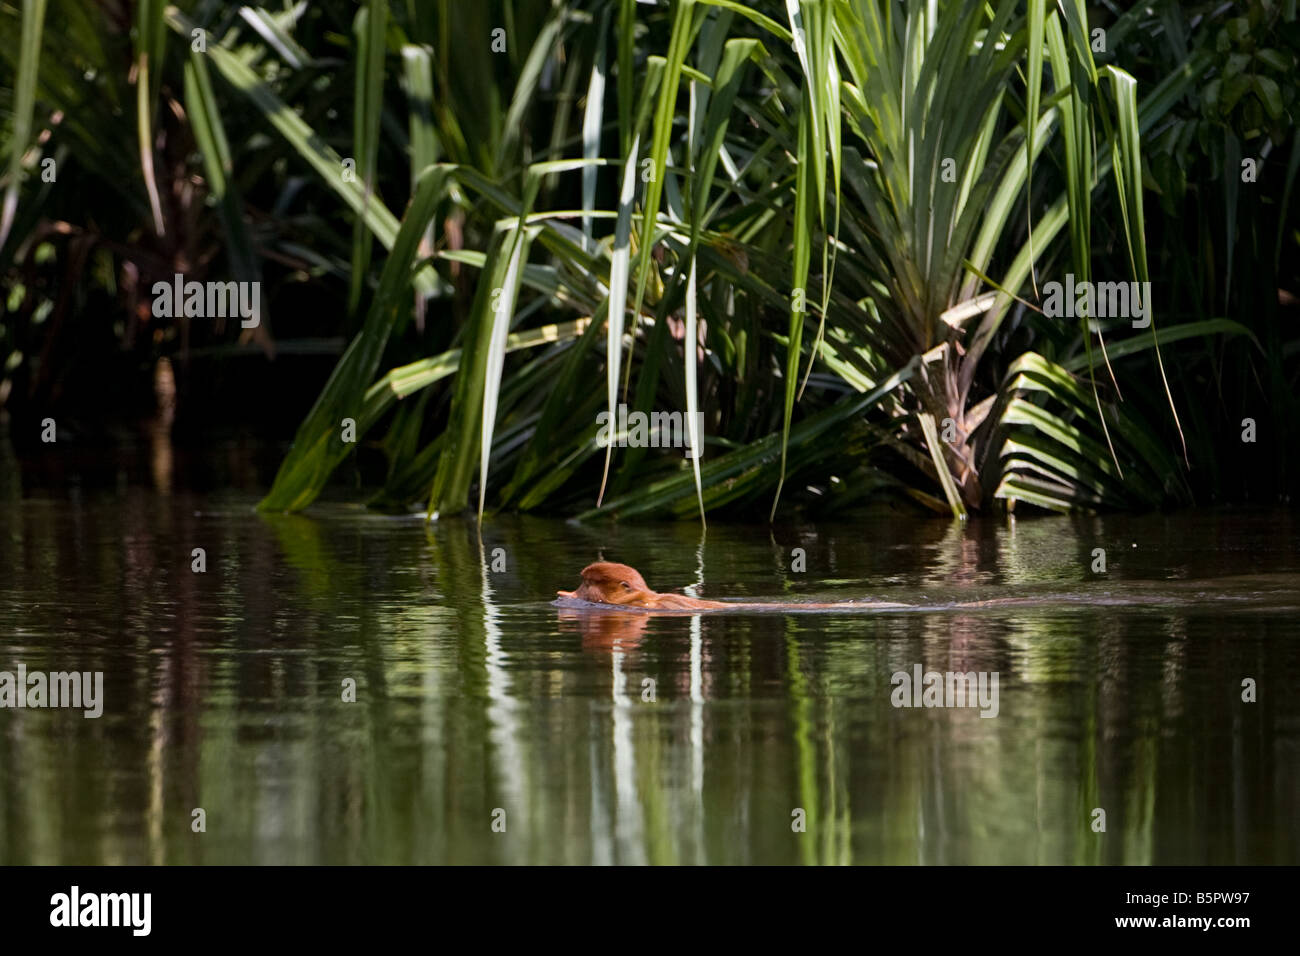 Adult proboscis monkey swimming in the Sekonyer River in Tanjung Puting NP Borneo (Image 1 of 2) Stock Photo